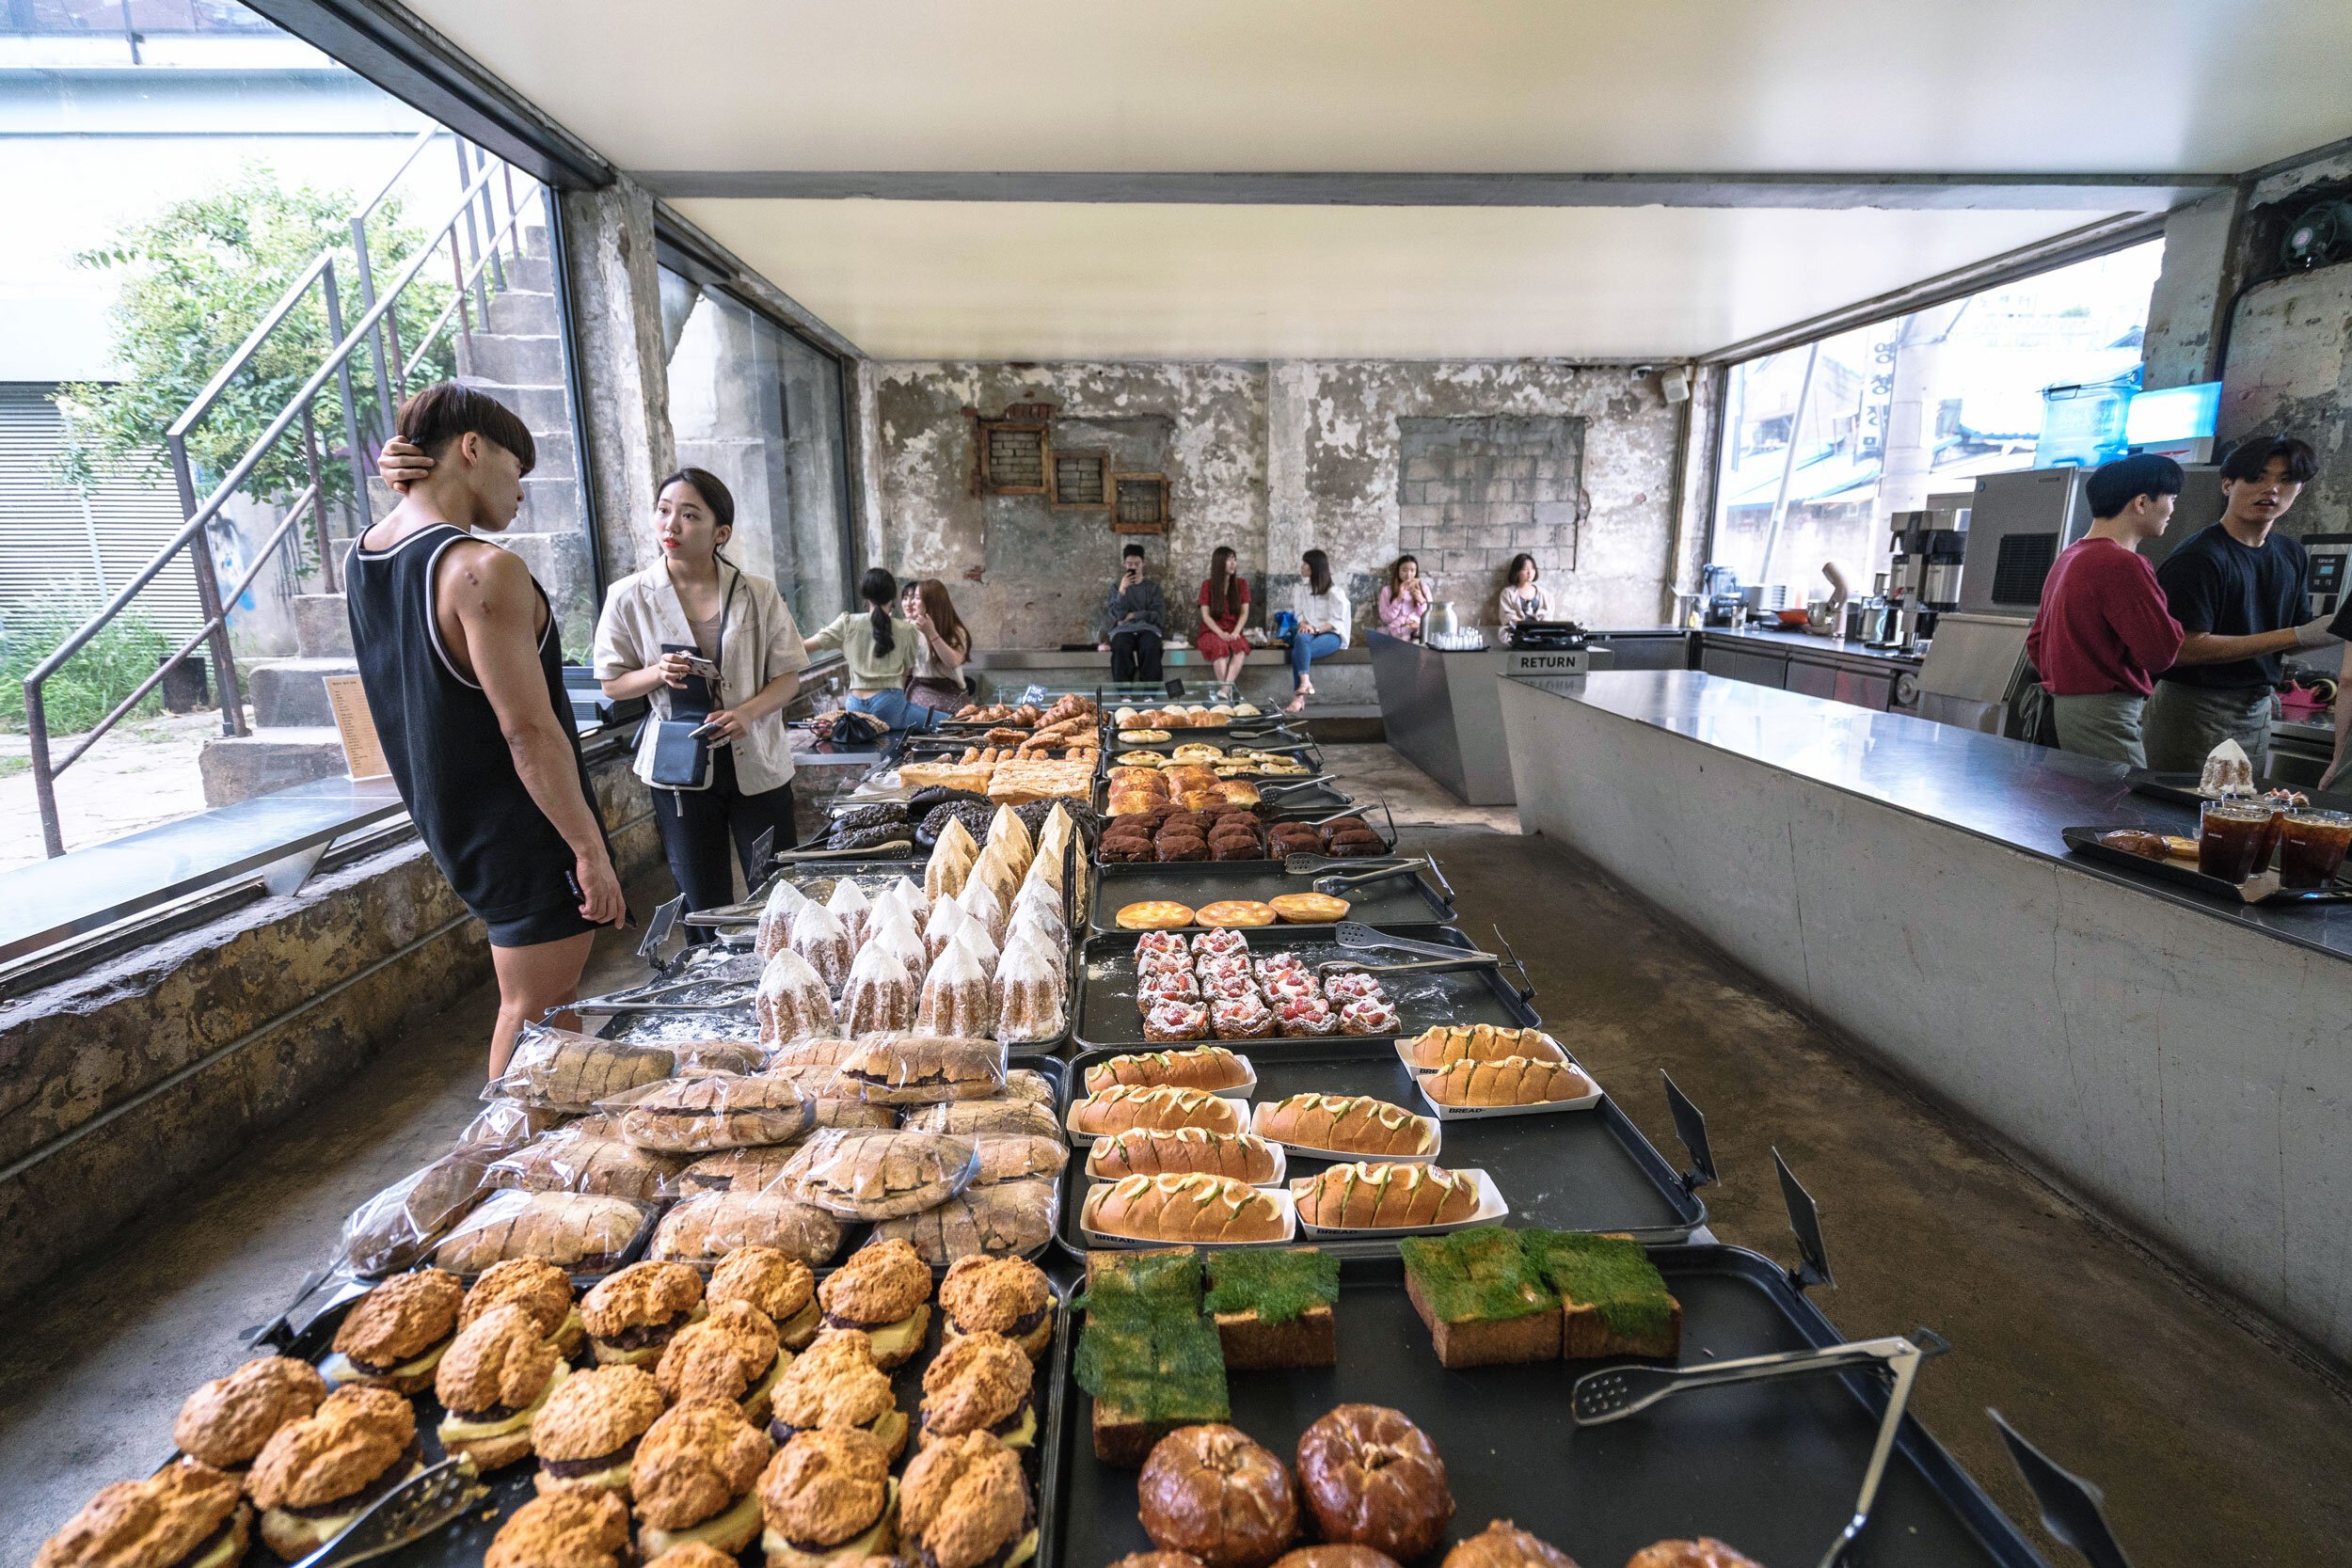 Pastries and baked goods